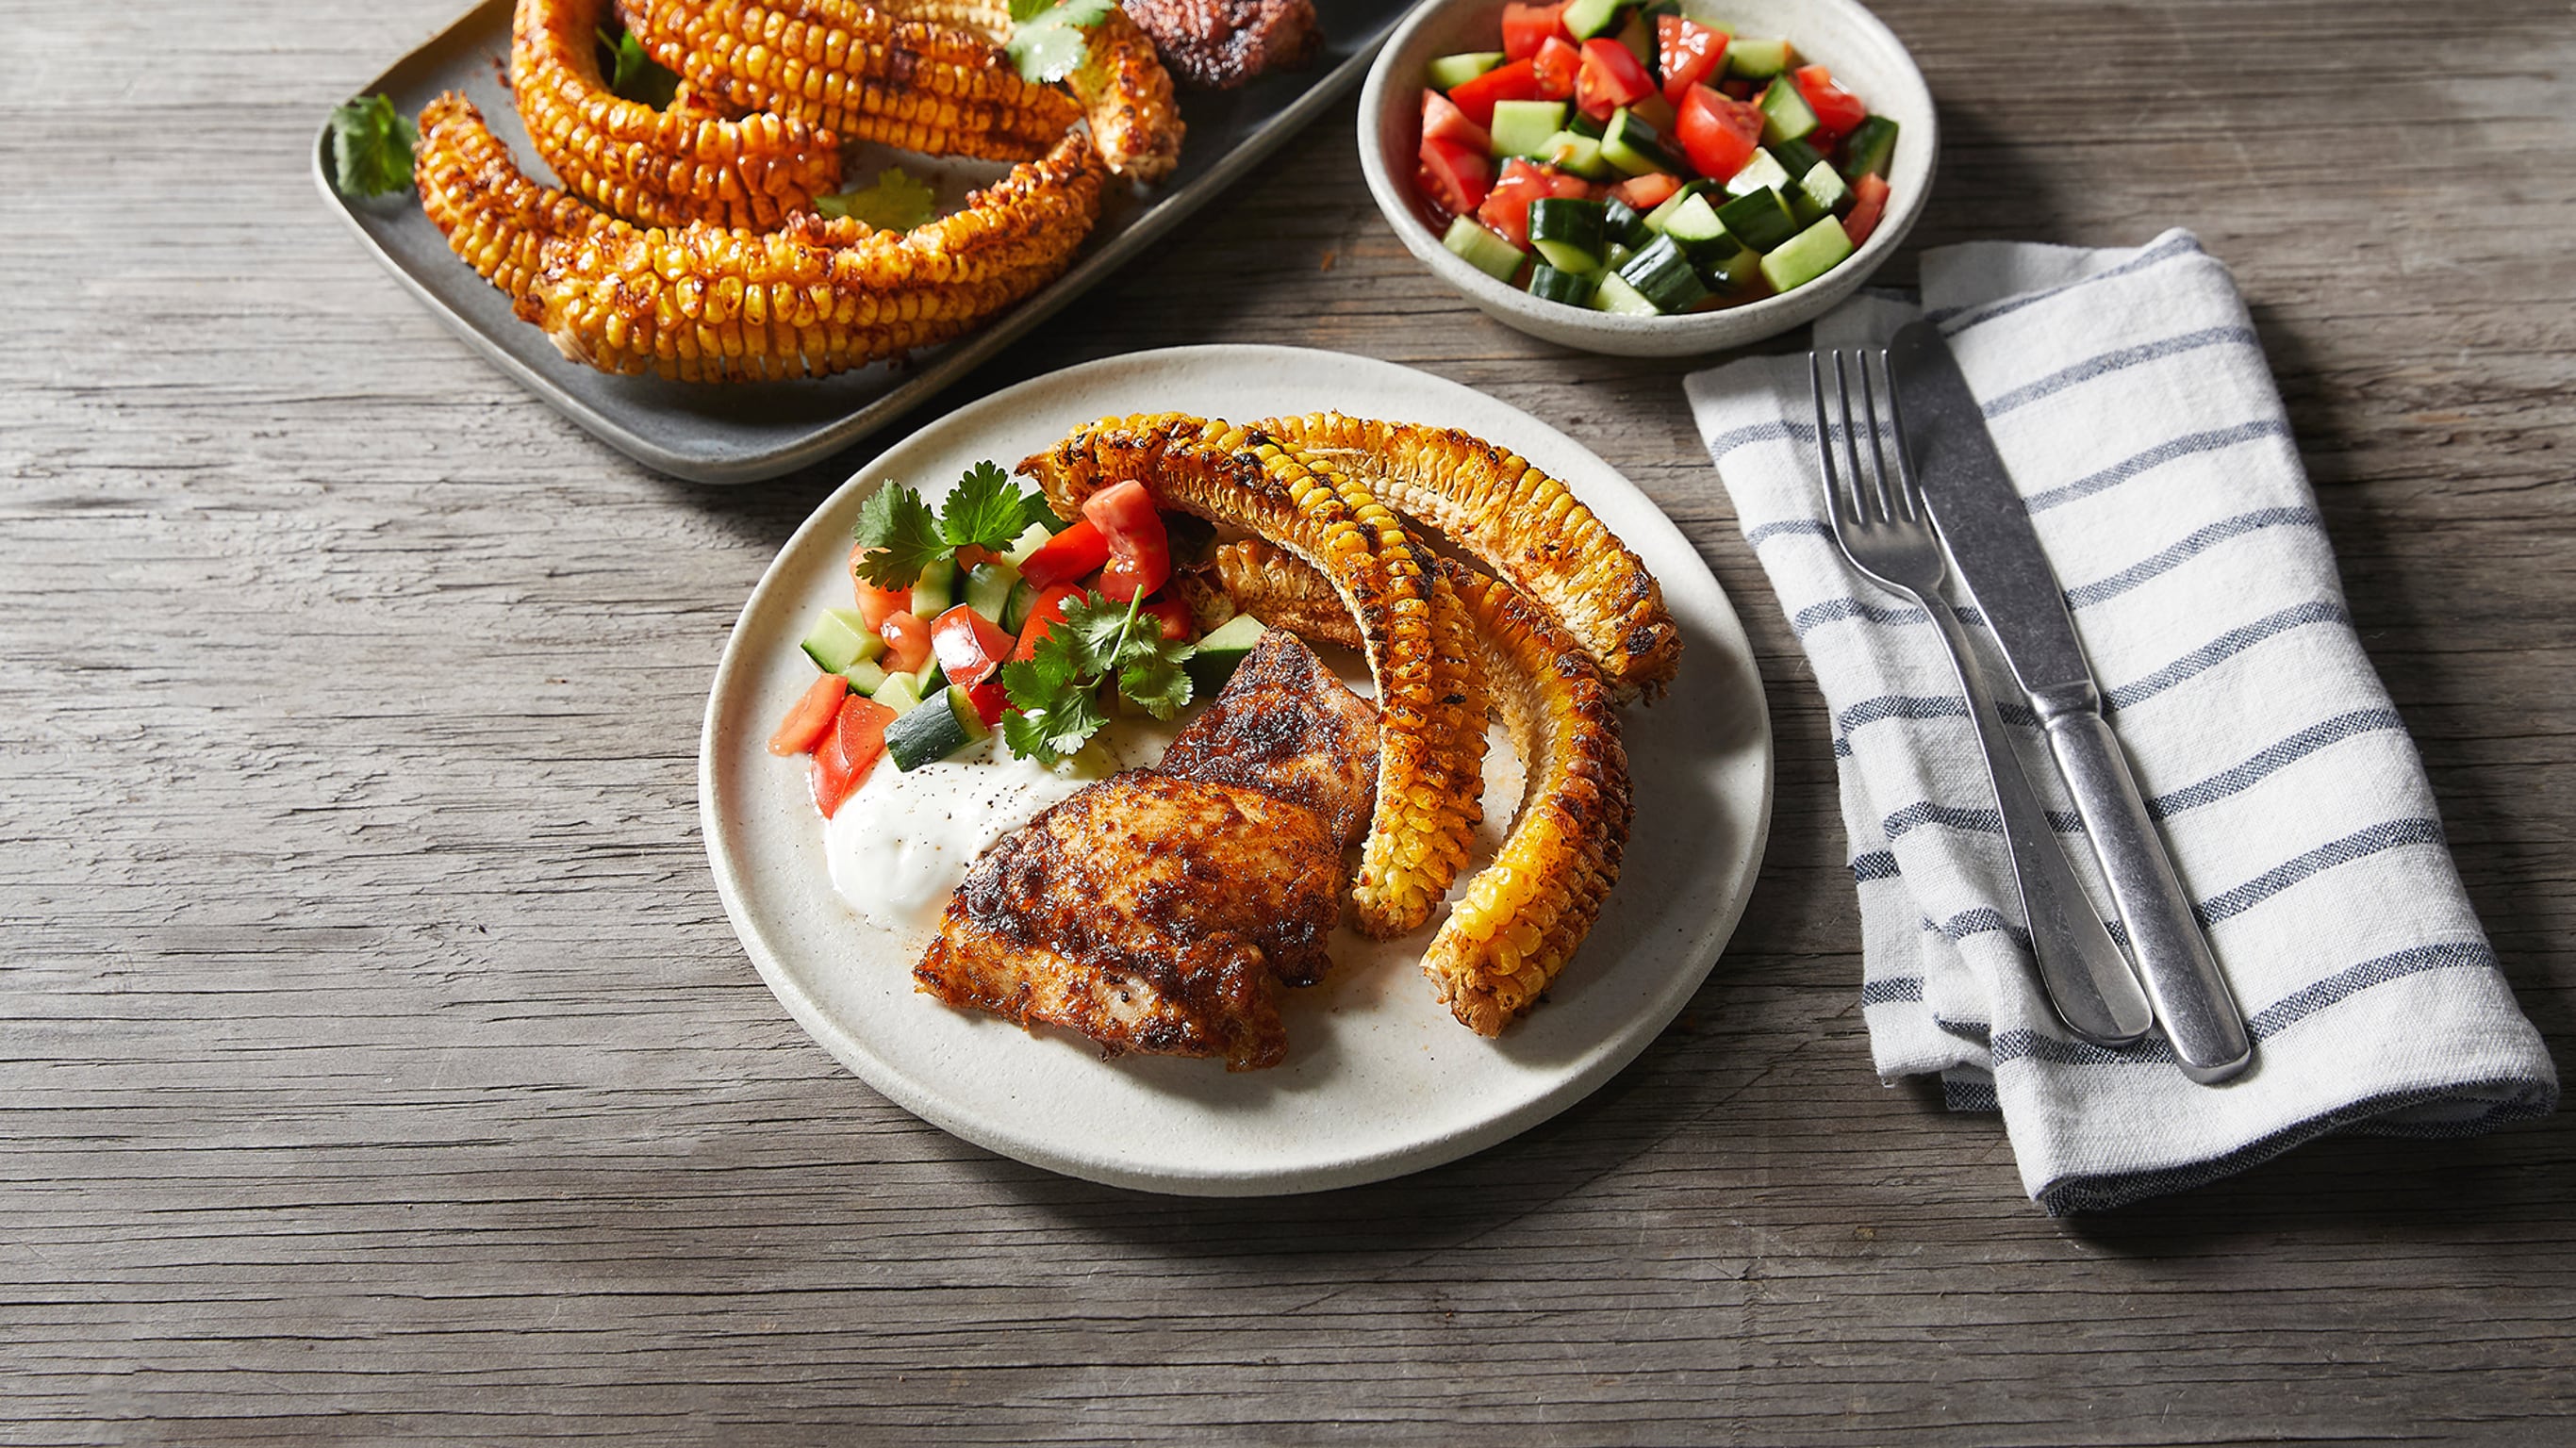 Grilled Chicken with Spicy Corn Ribs from the Centr meal plan.